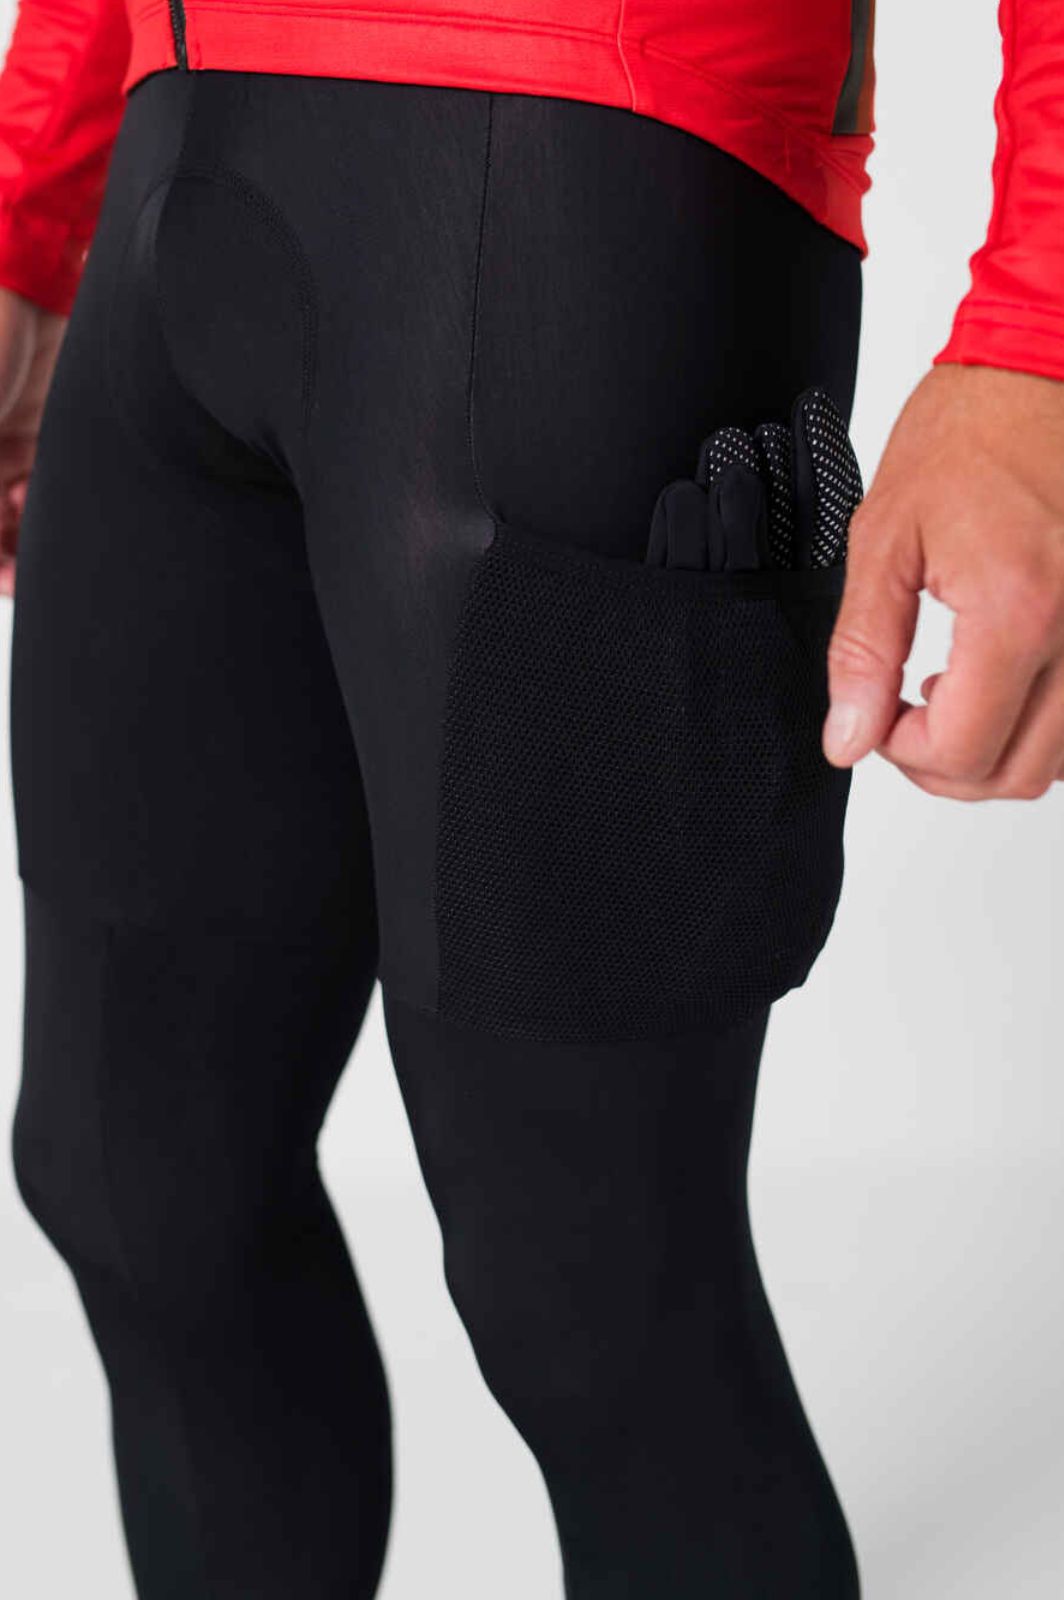 Men's Thermal Cycling Bib Tights for Cool/Cold Weather